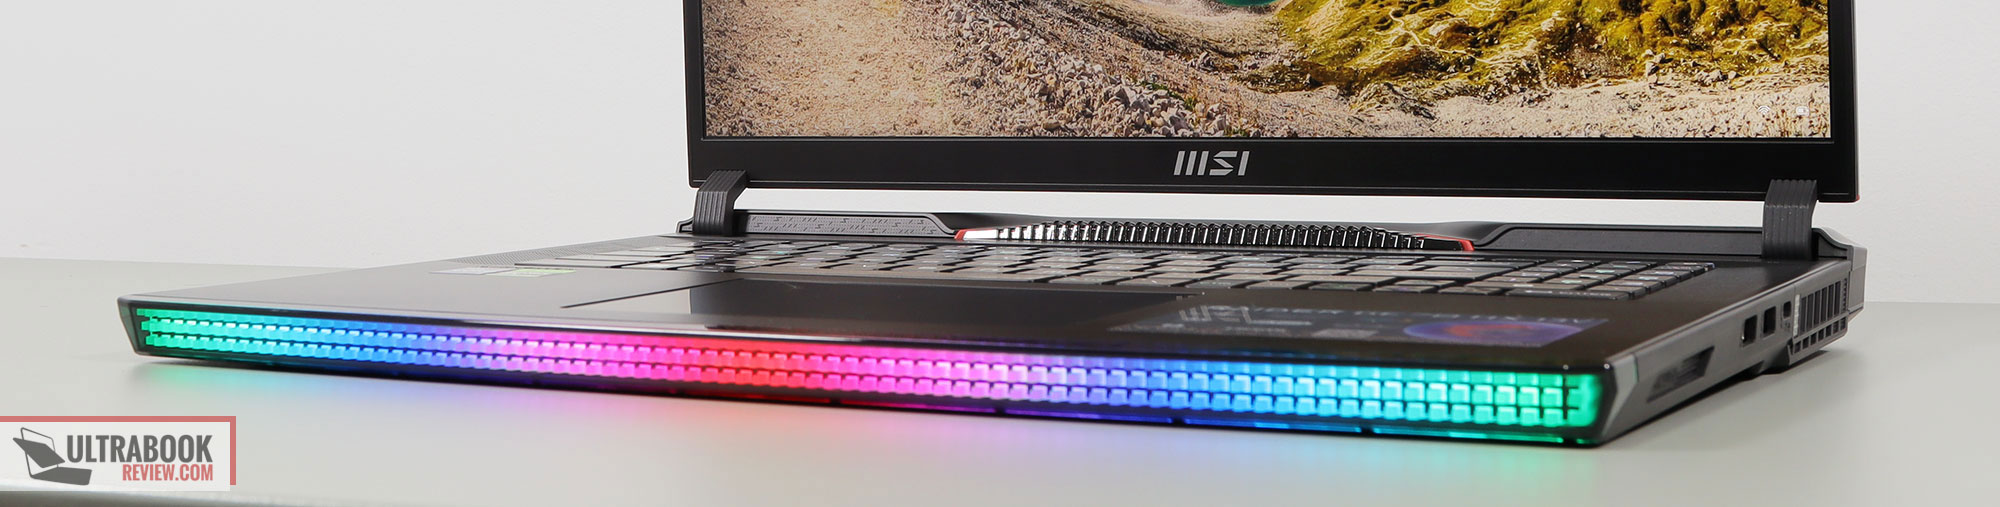 MSI Raider GE78 HX now available to be one of the first laptops with PCIe5  SSD support for read rates of over 15 GB/s -  News